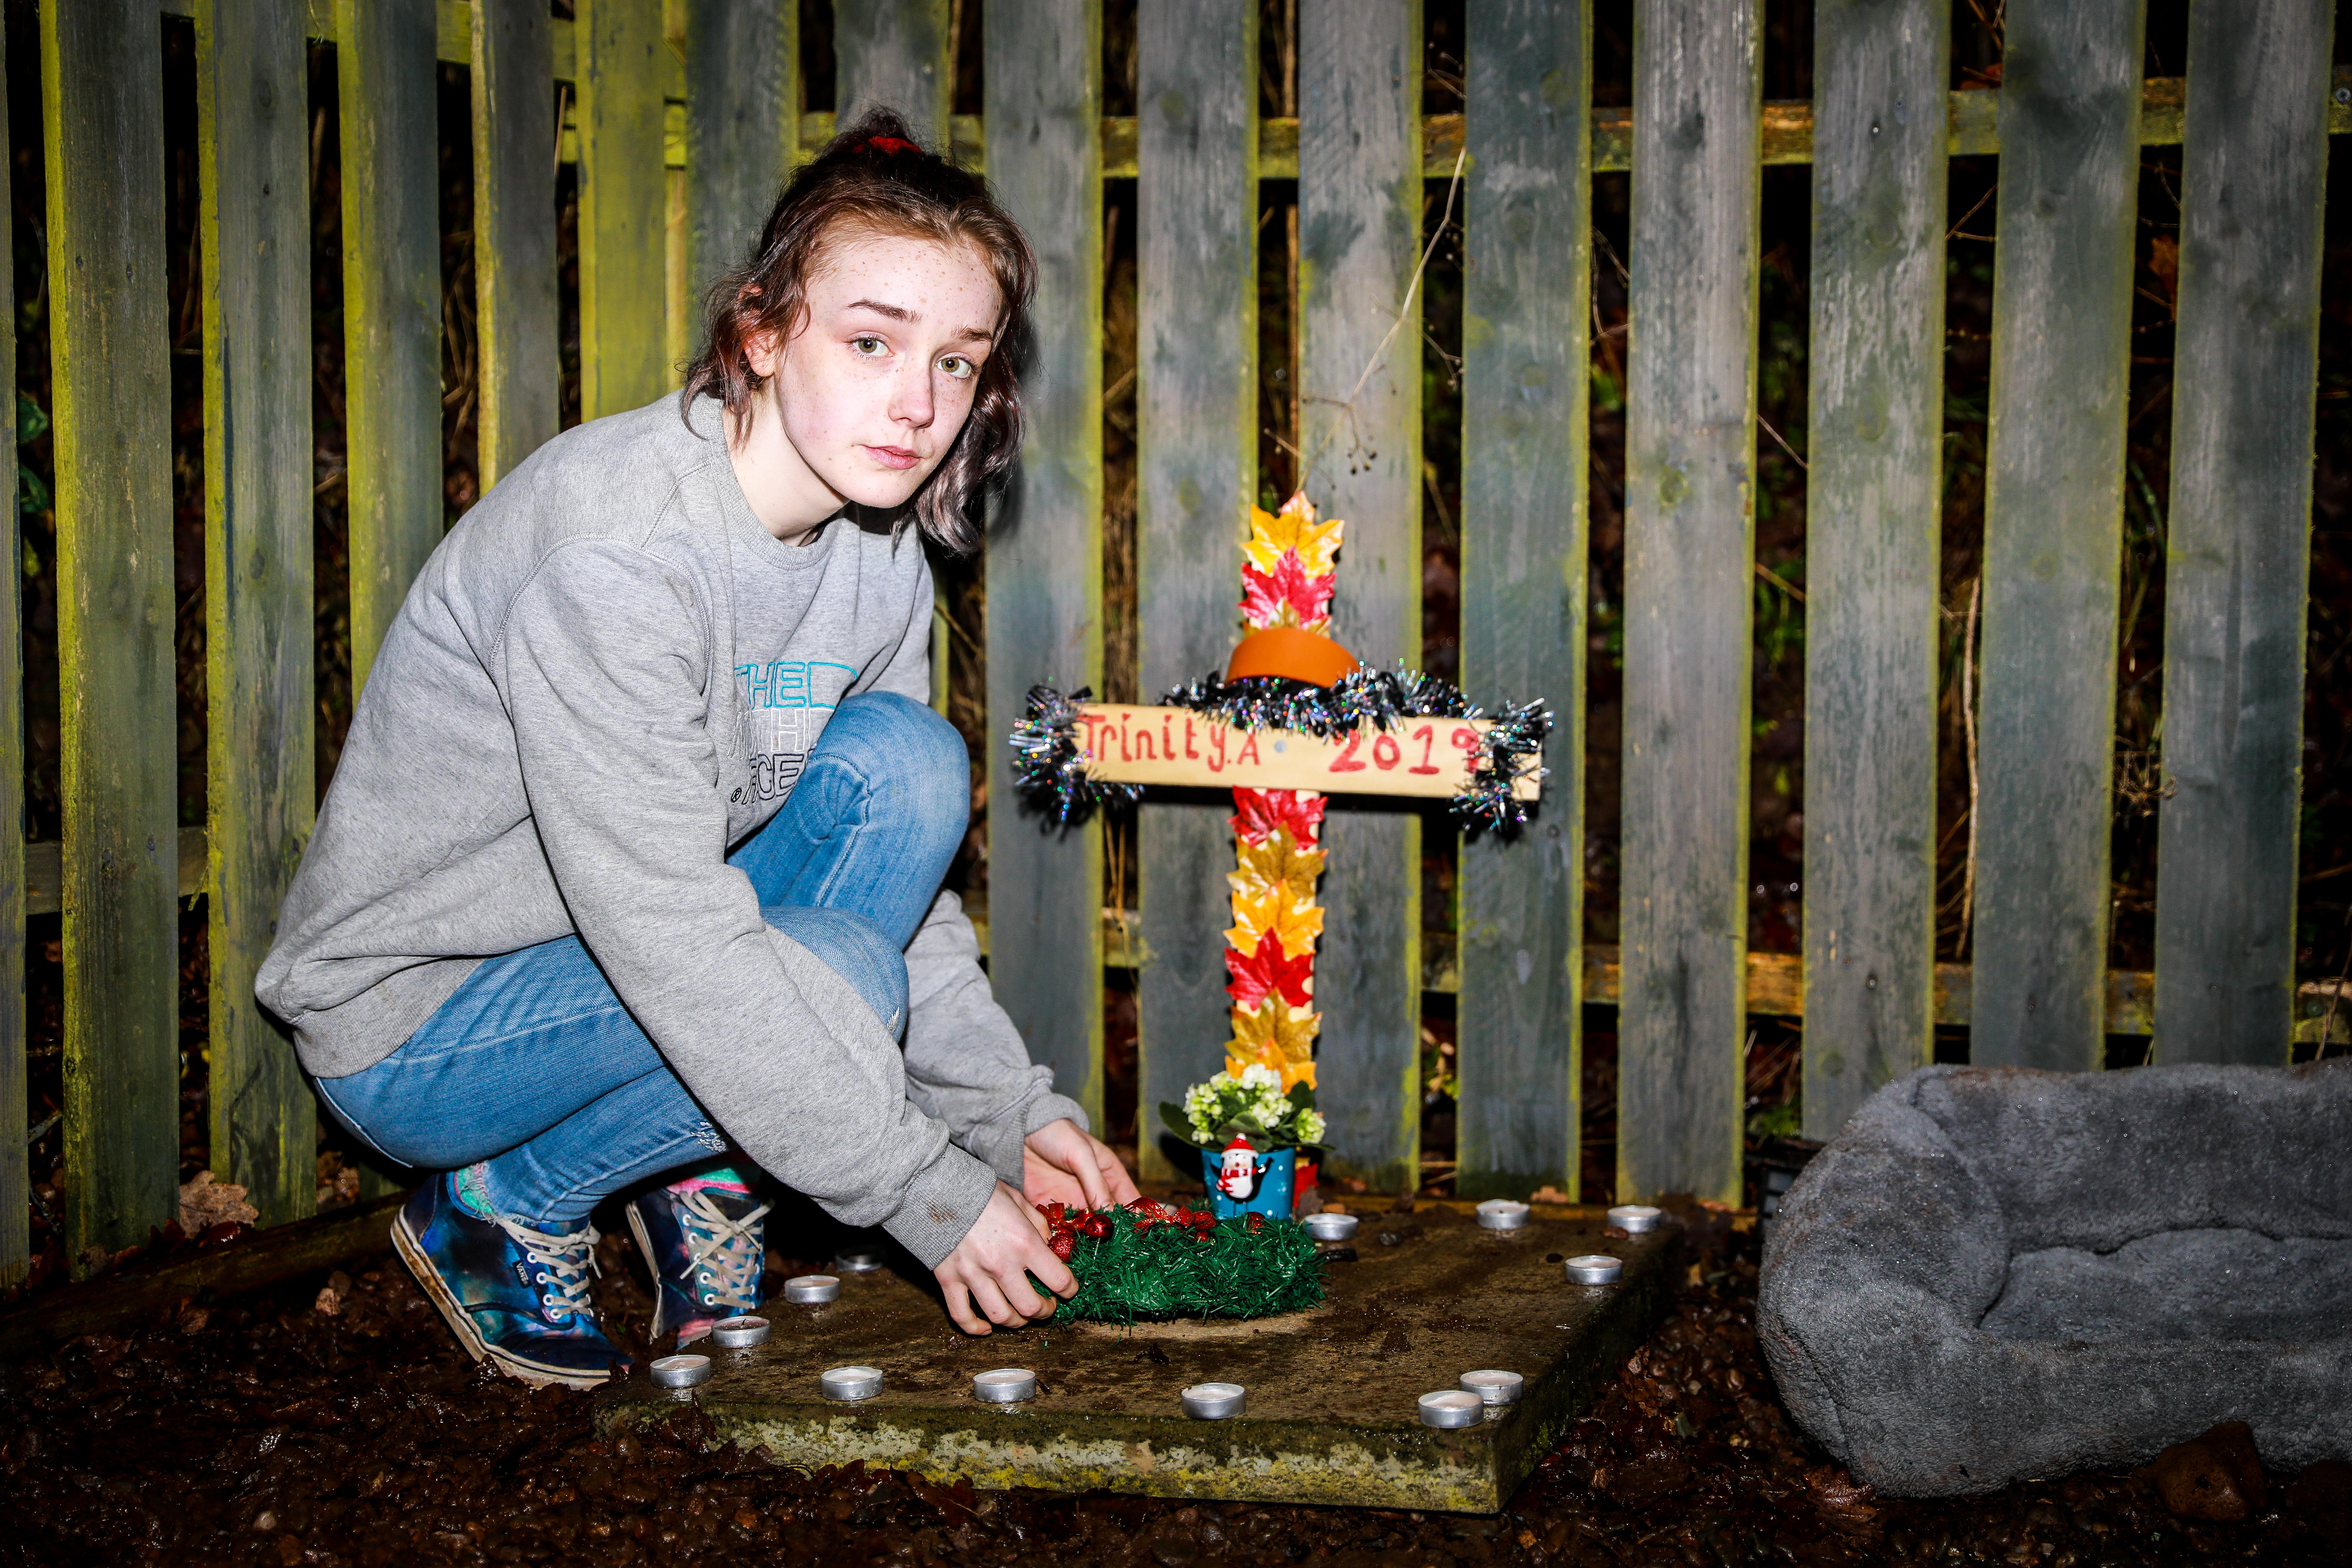 Jemma hunter (19) tends to the grave of her puppy 'Trinity' after she was knocked down and killed by a speeding driver outside her home